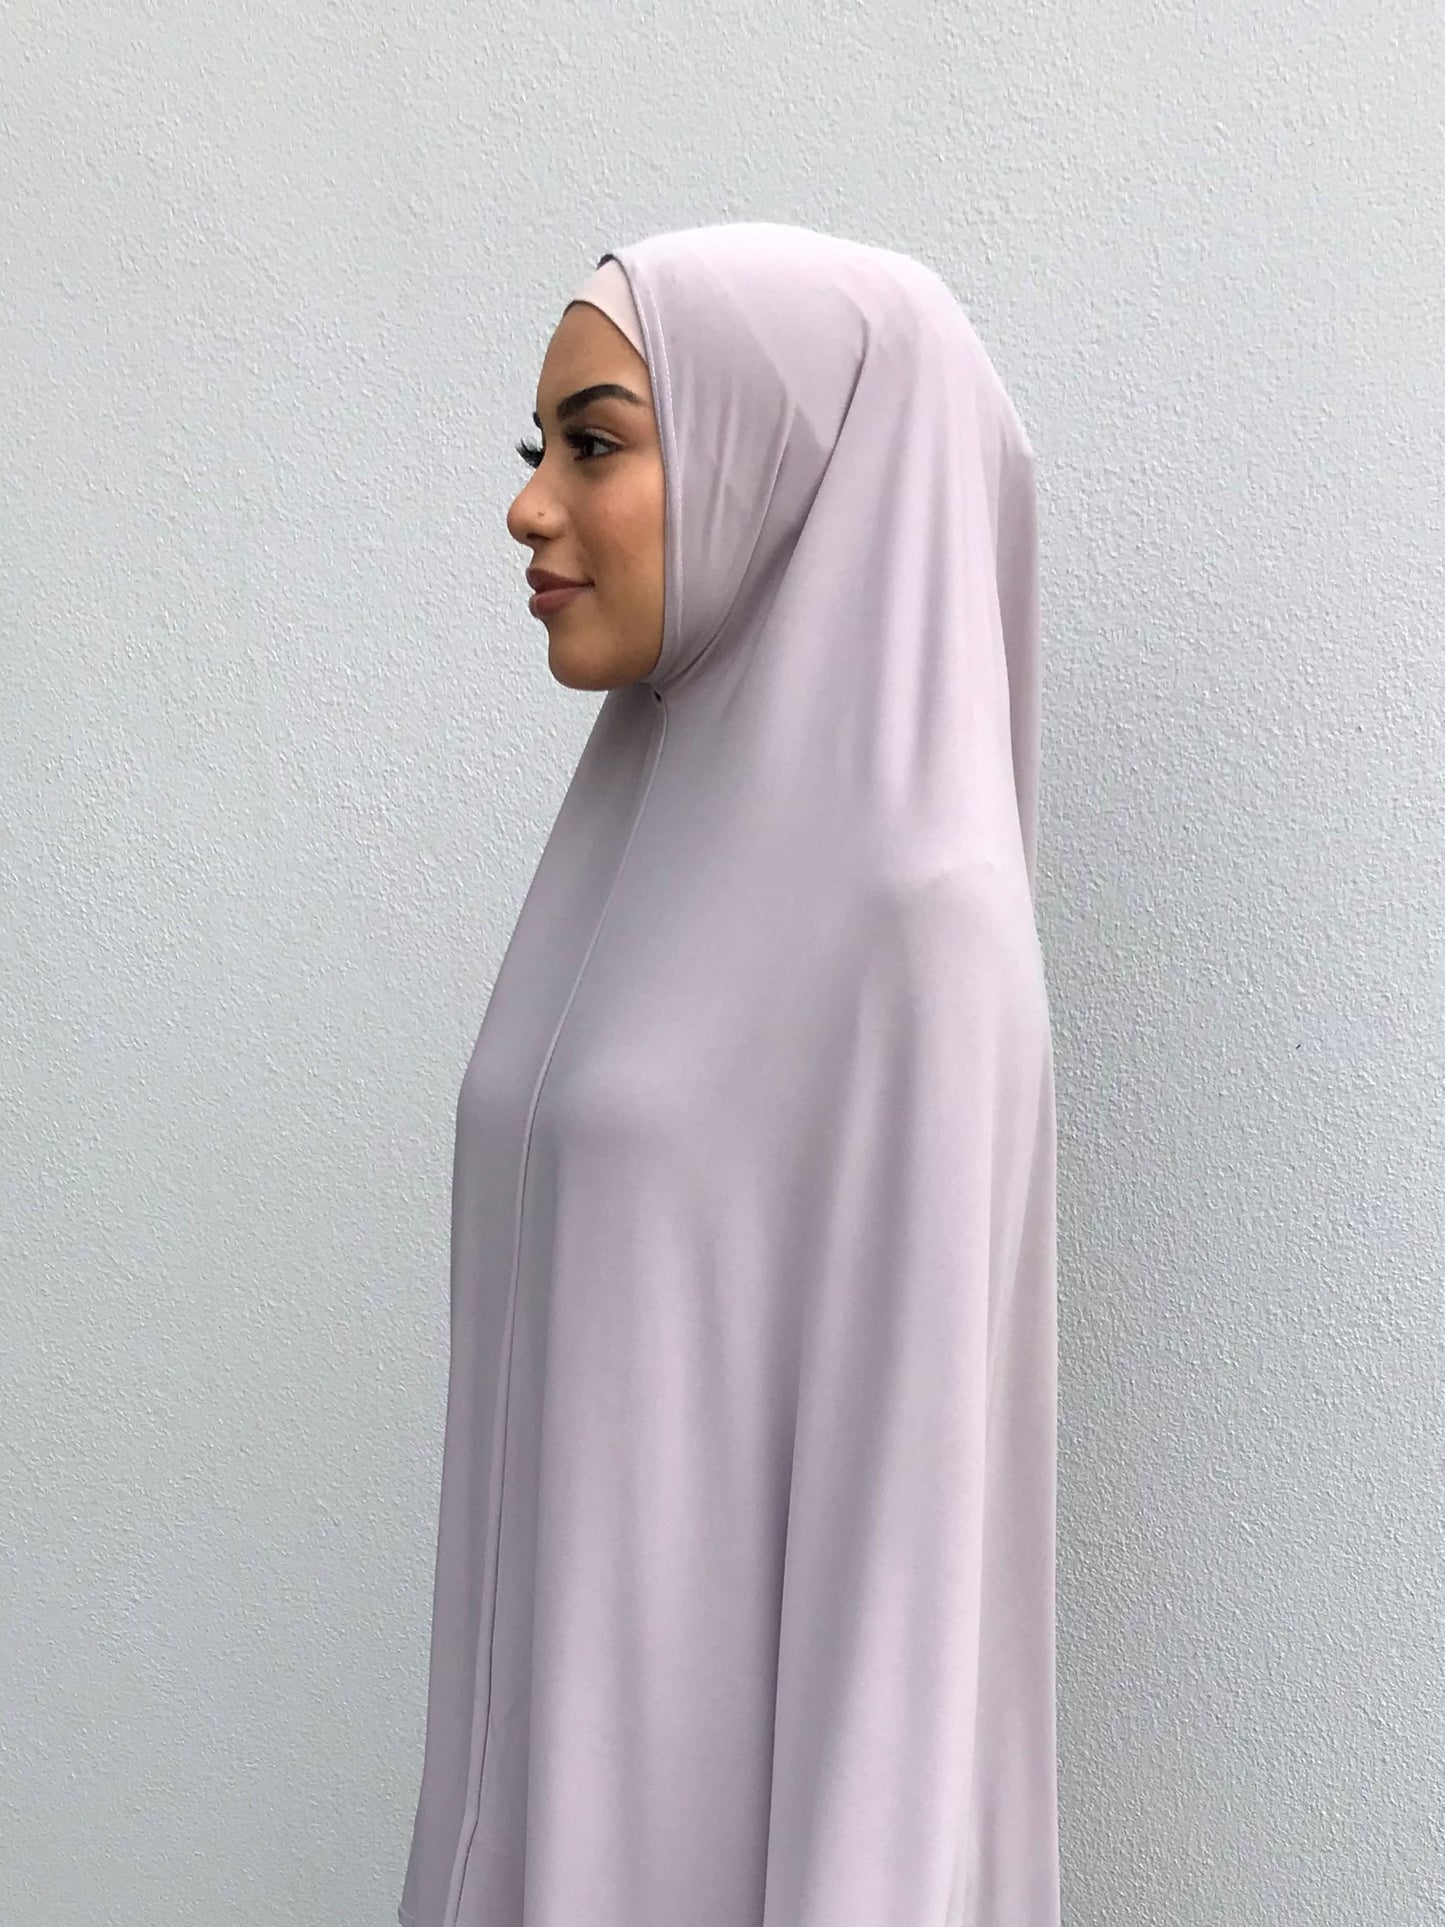 Standard Length Sleeved Jelbab in Oyster Grey - Behind The Veil